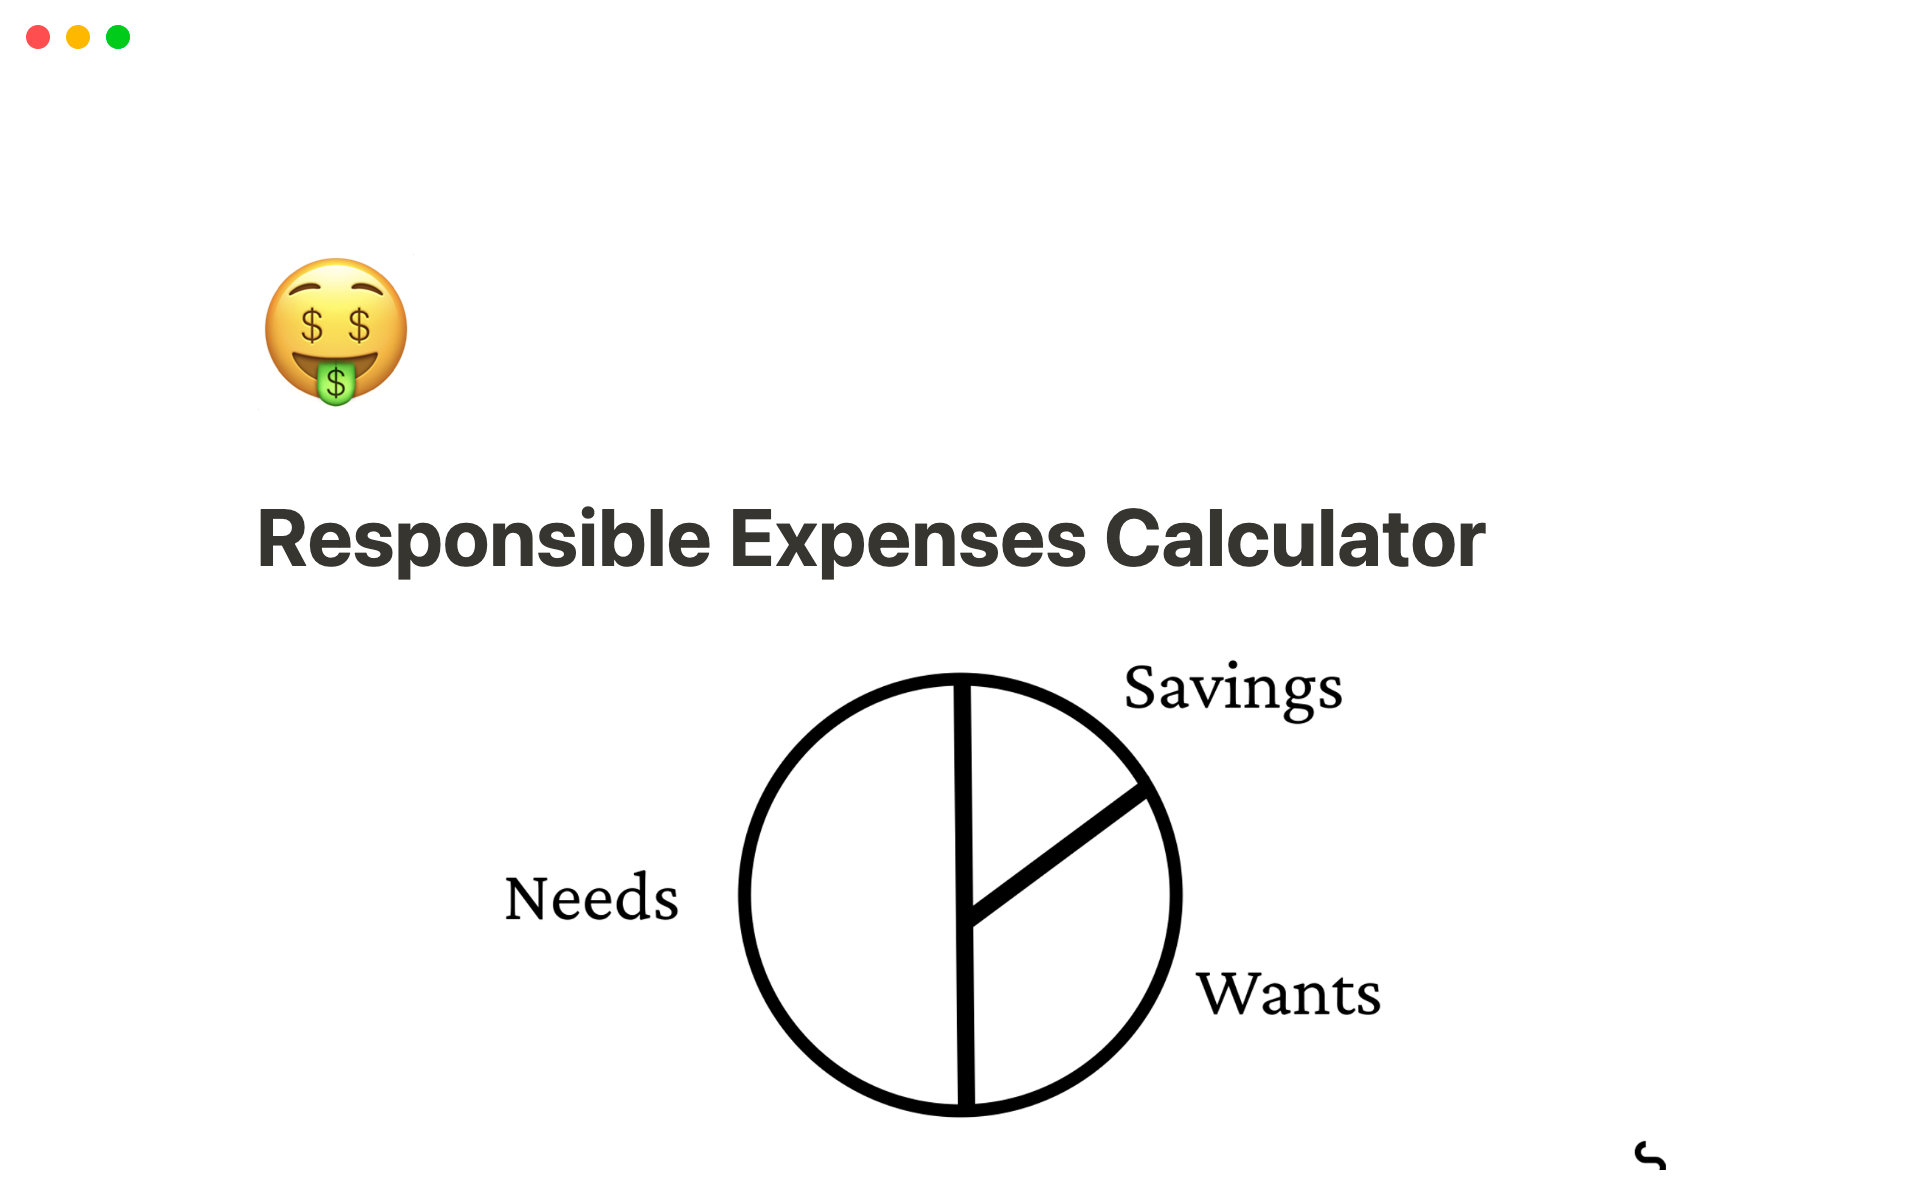 Track and categorize your expenses while adhering to the 50/30/20 rule, ensuring a balanced approach to your finances, with the 50/30/20 Rule Expense Tracker Notion template.